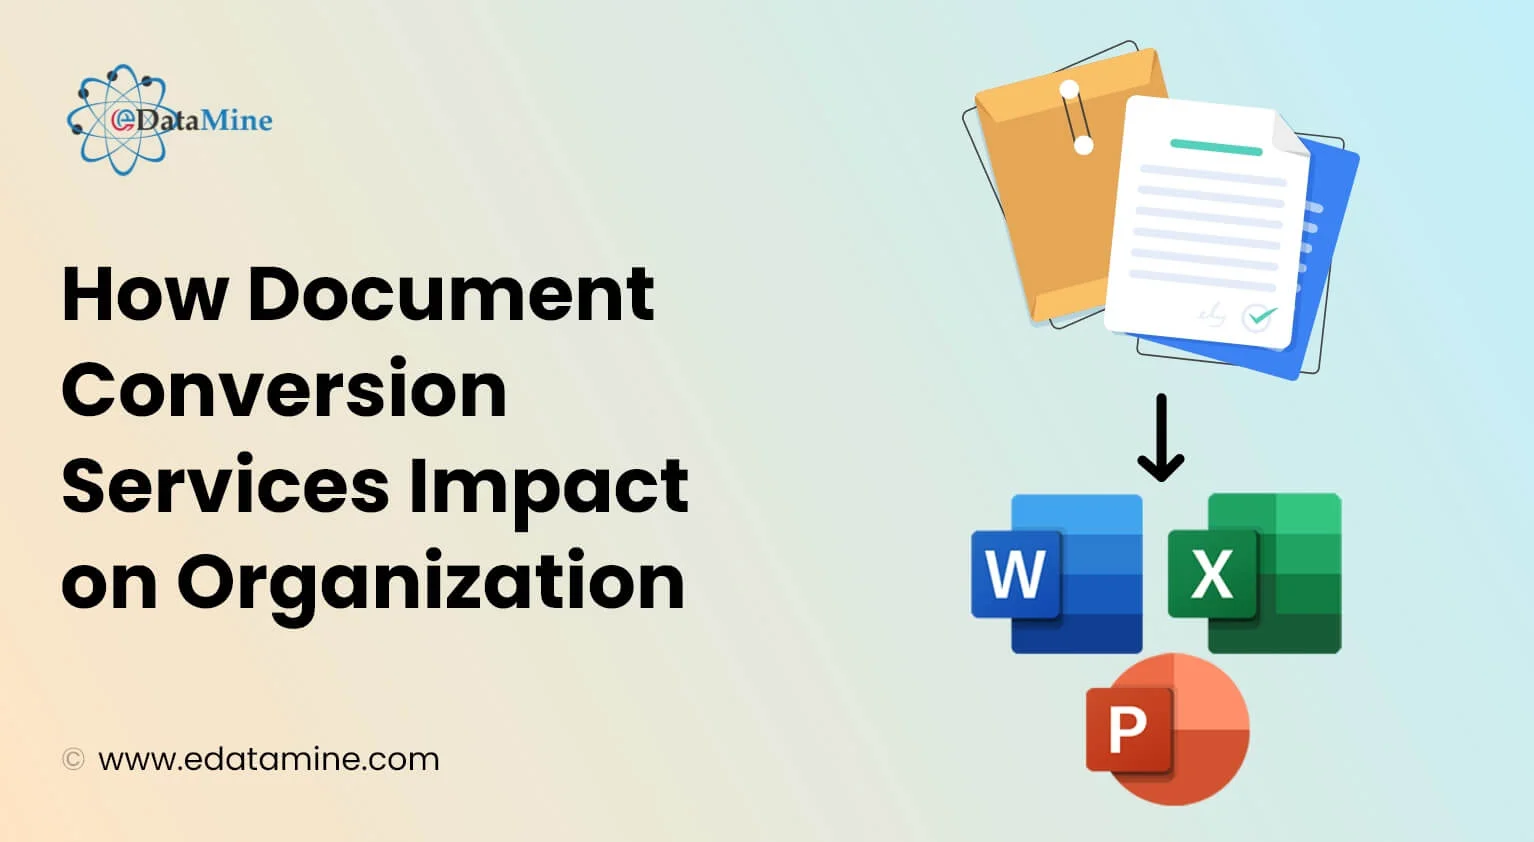 How Document Conversion Services Impact on Organization